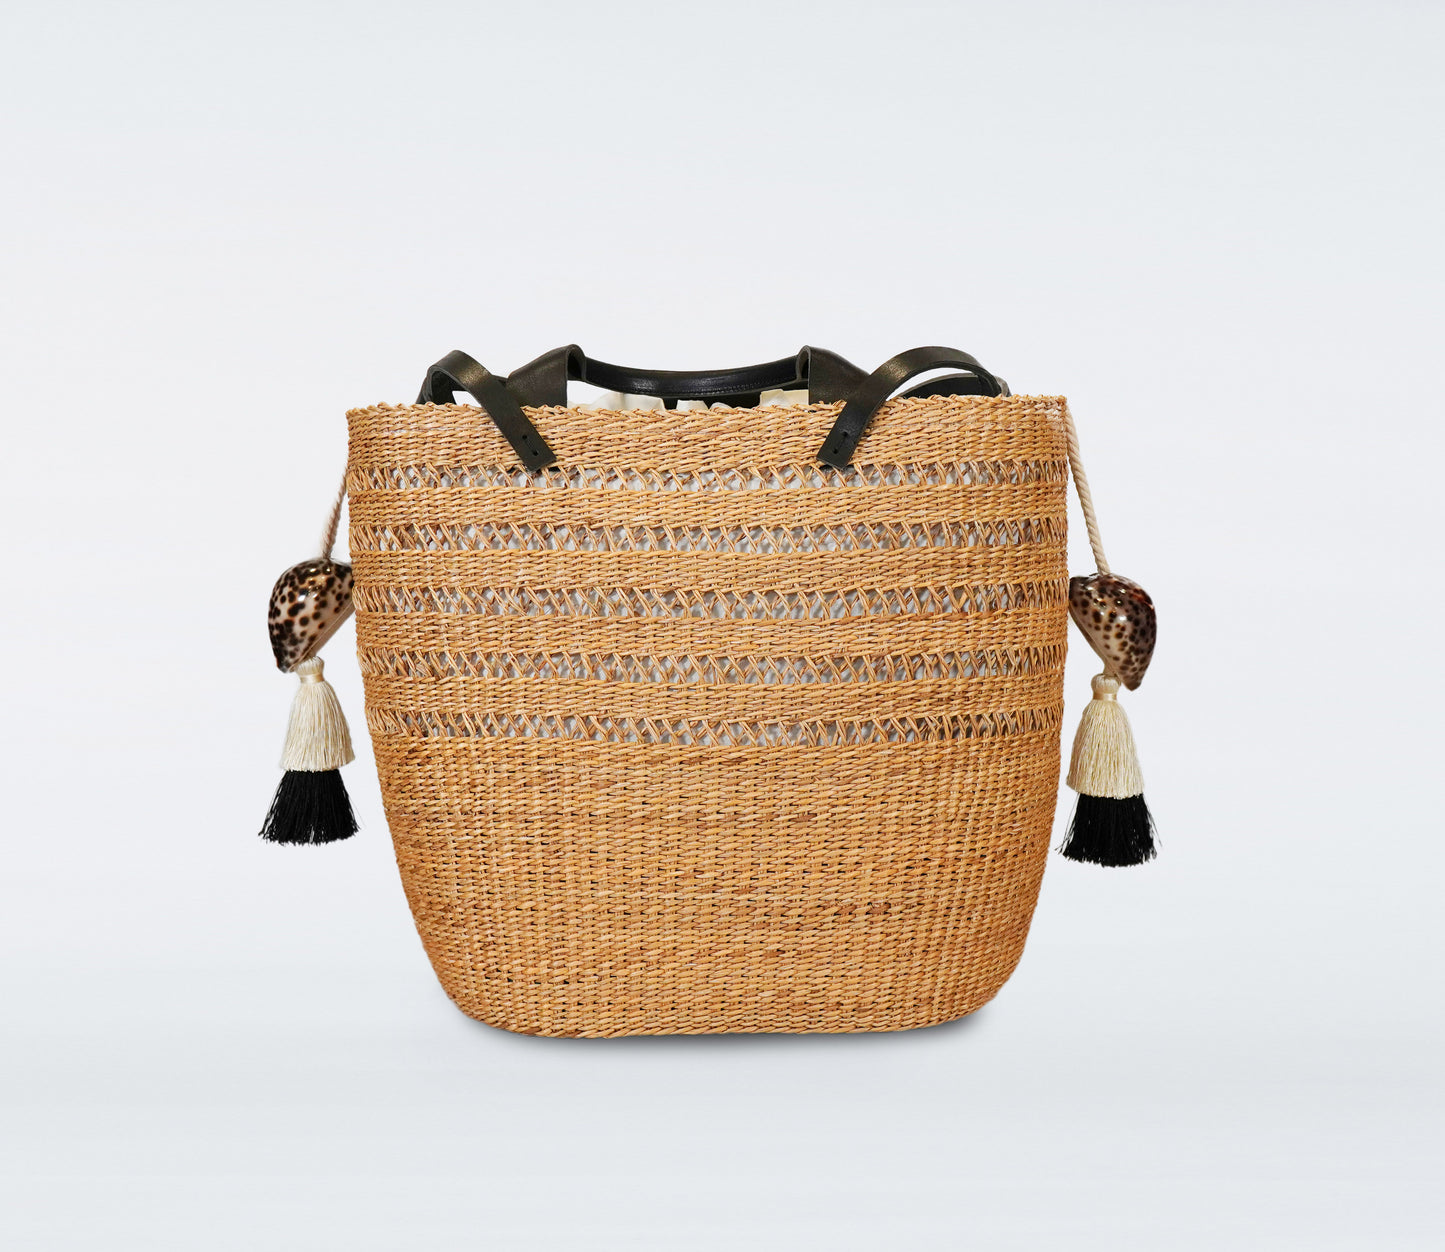 Large black basket in straw, black recycled leather handles, cotton bag and natural shells.